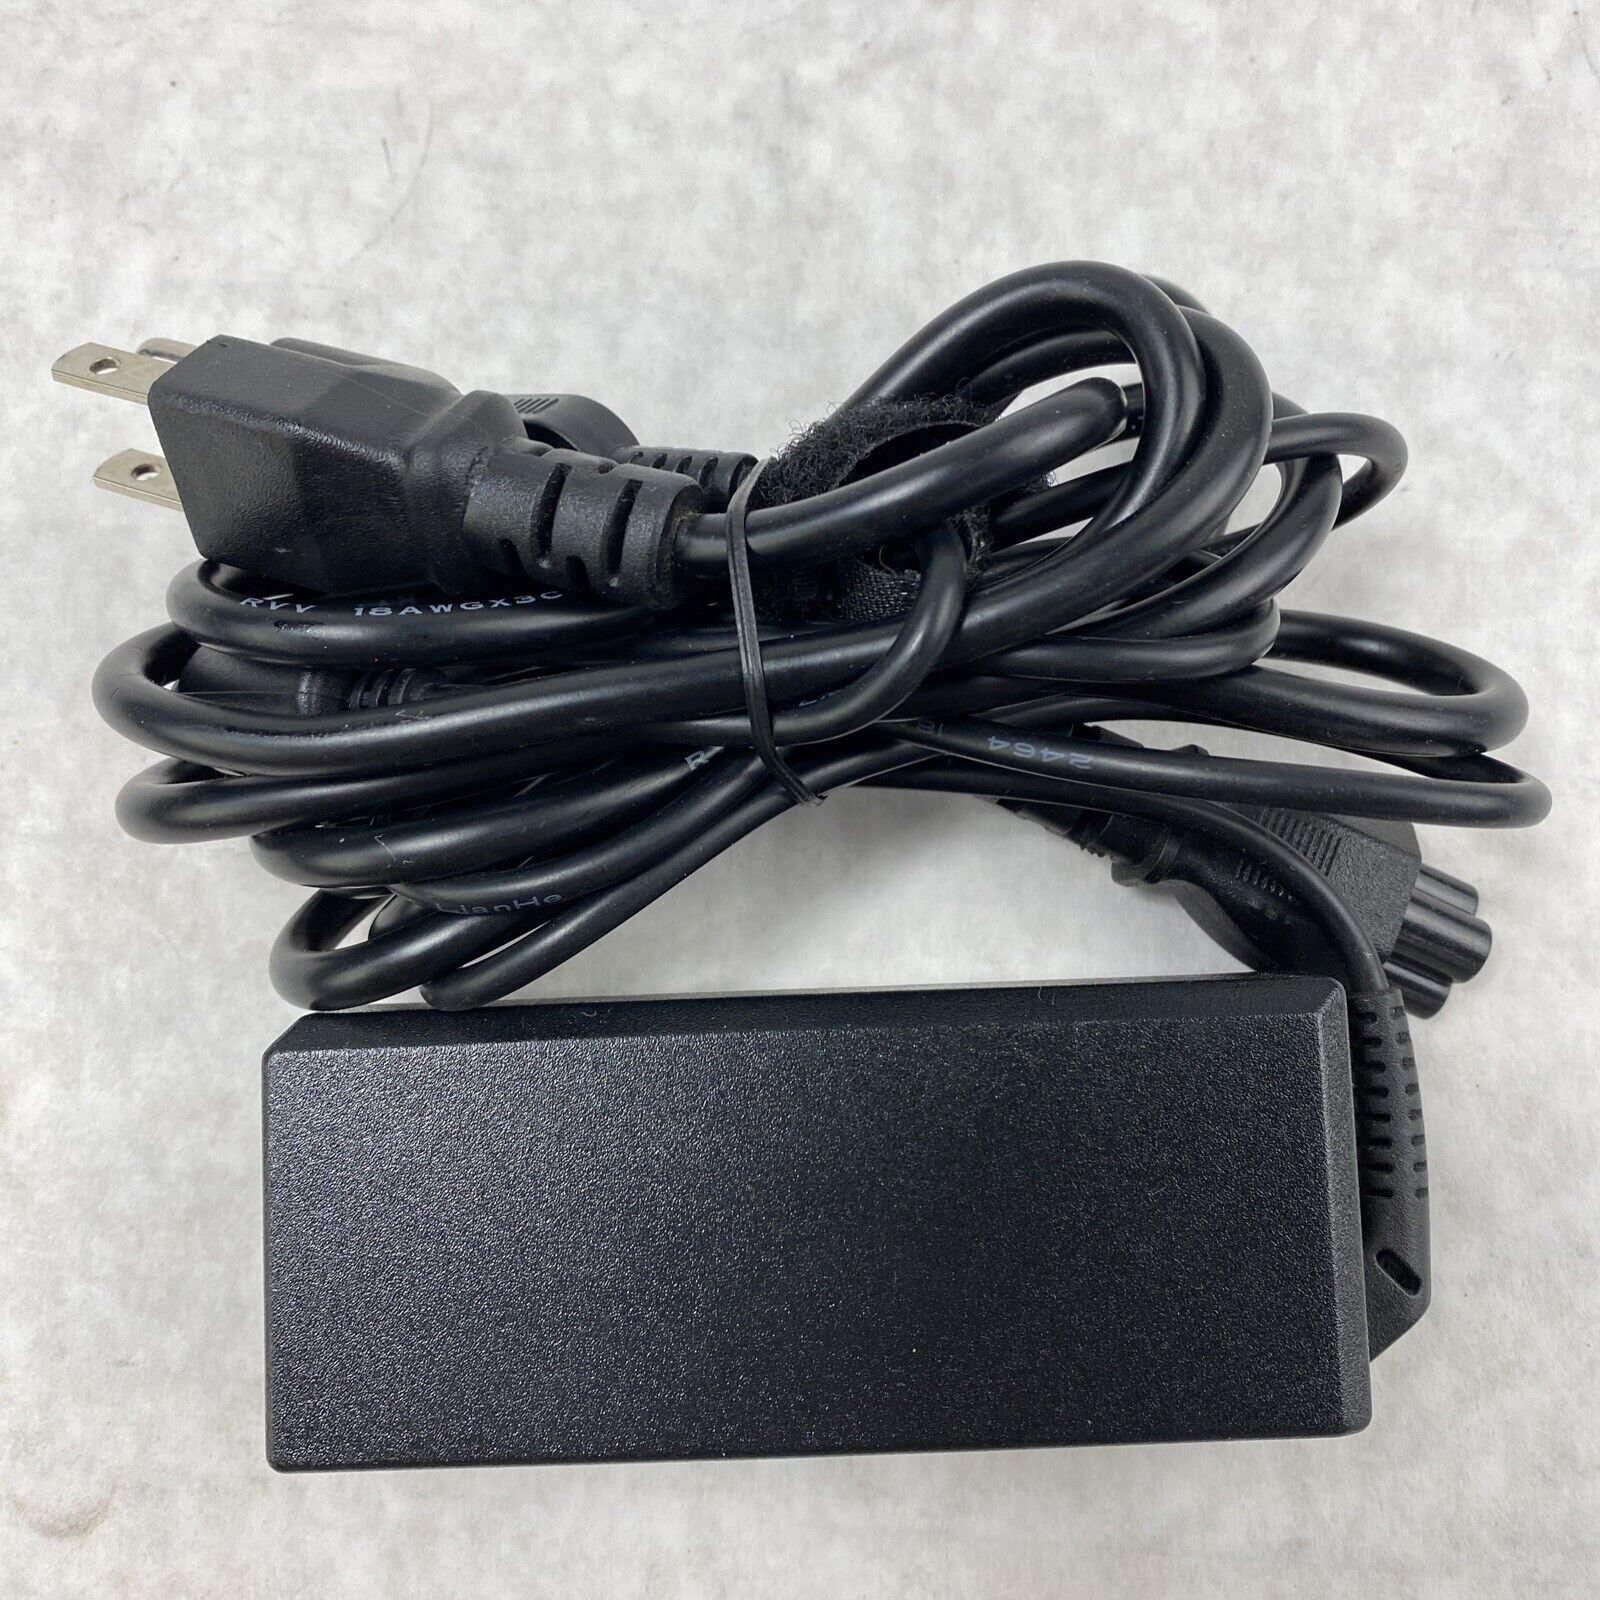 AC Power Adapter SK90200325 Replacement 20V 3.25A for Lenovo Square Tip 65w